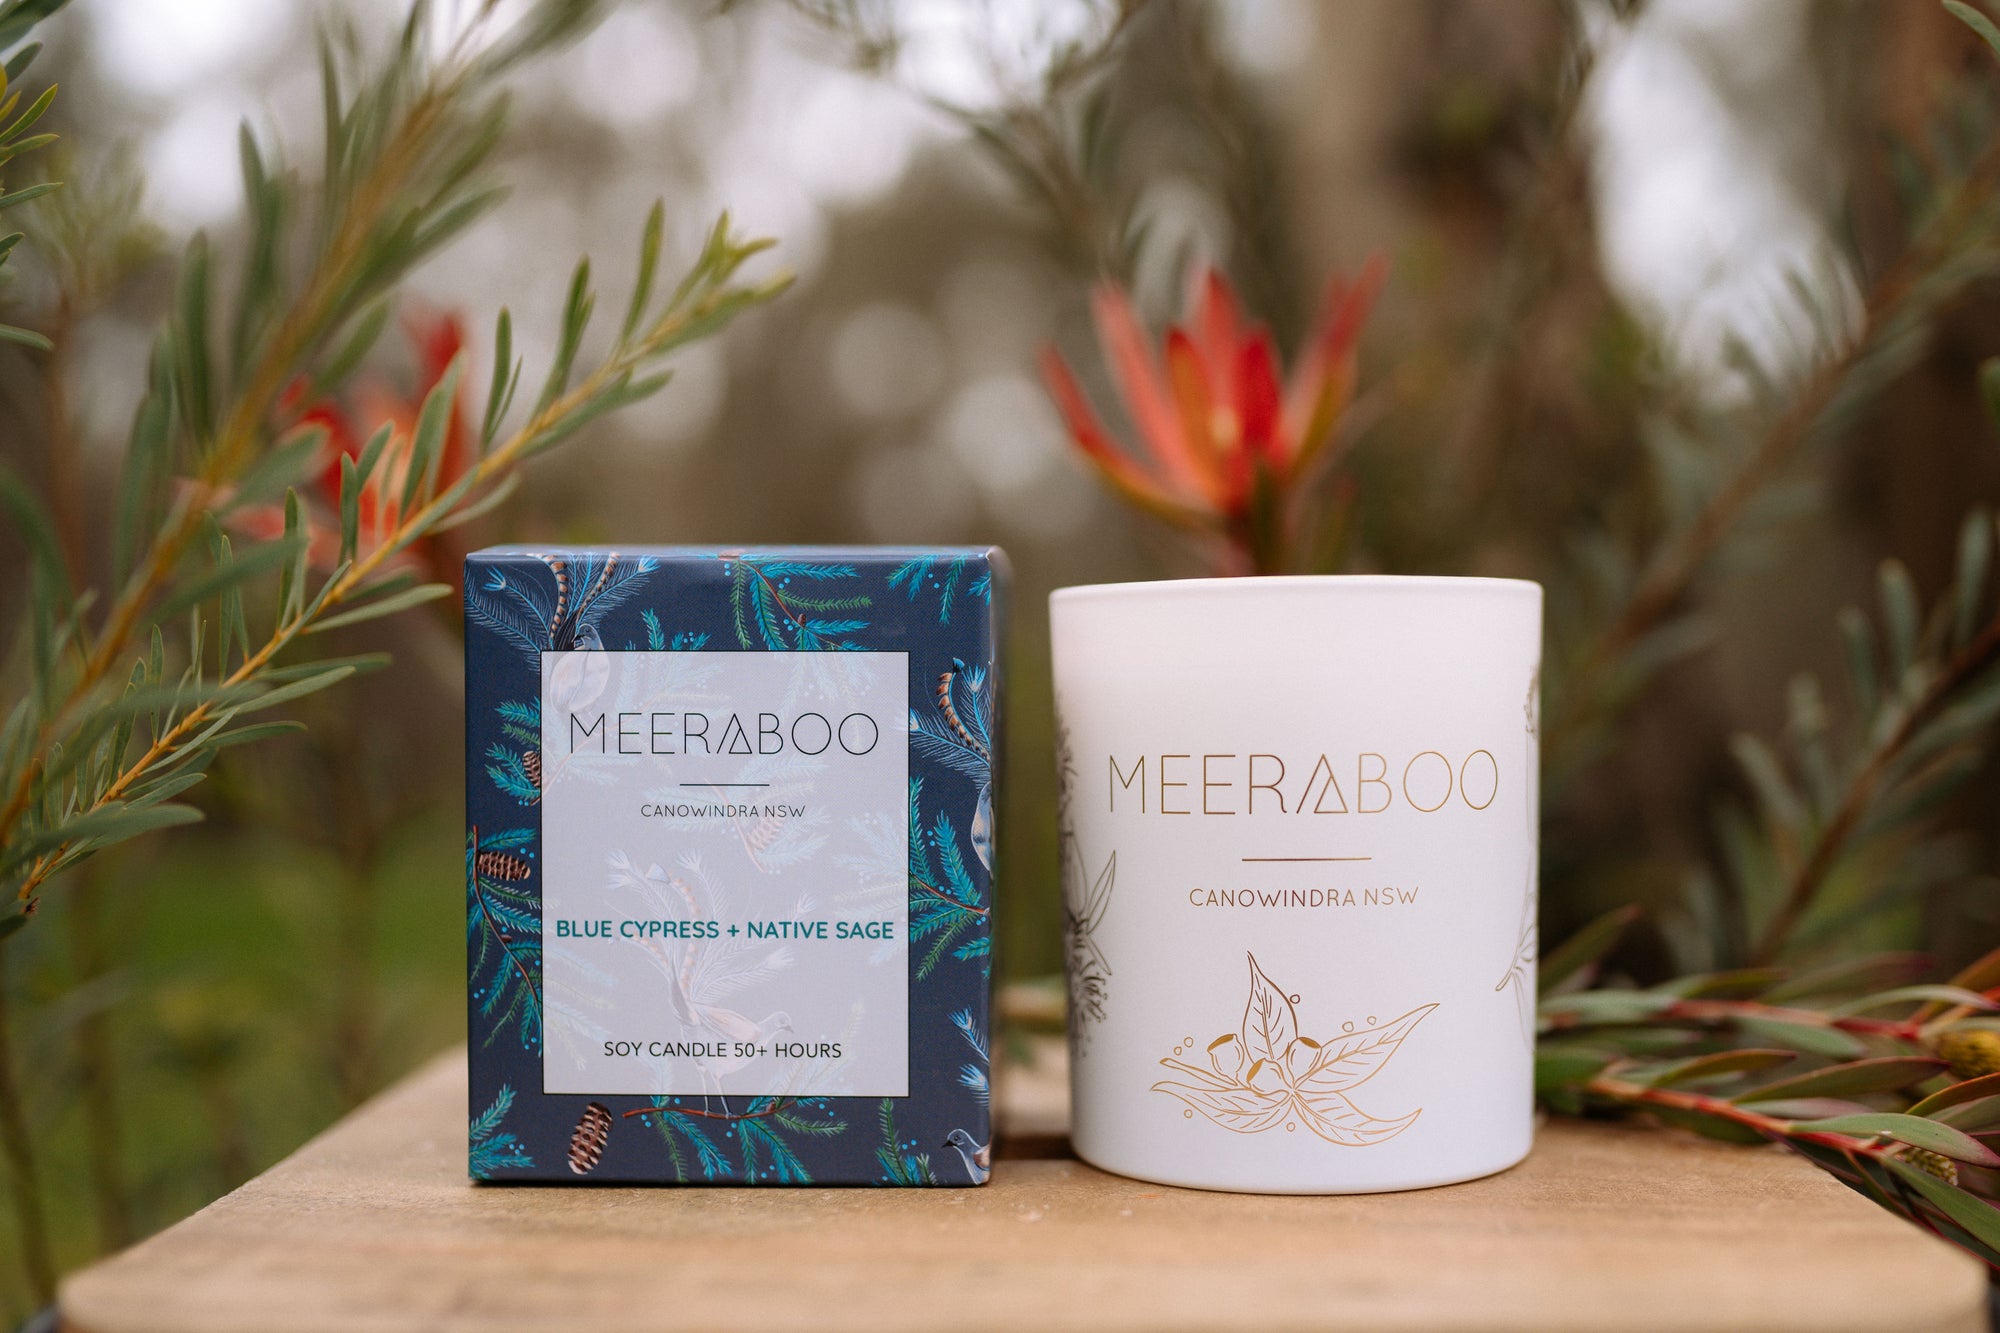 Behind the Scents / Blue Cypress + Native Sage